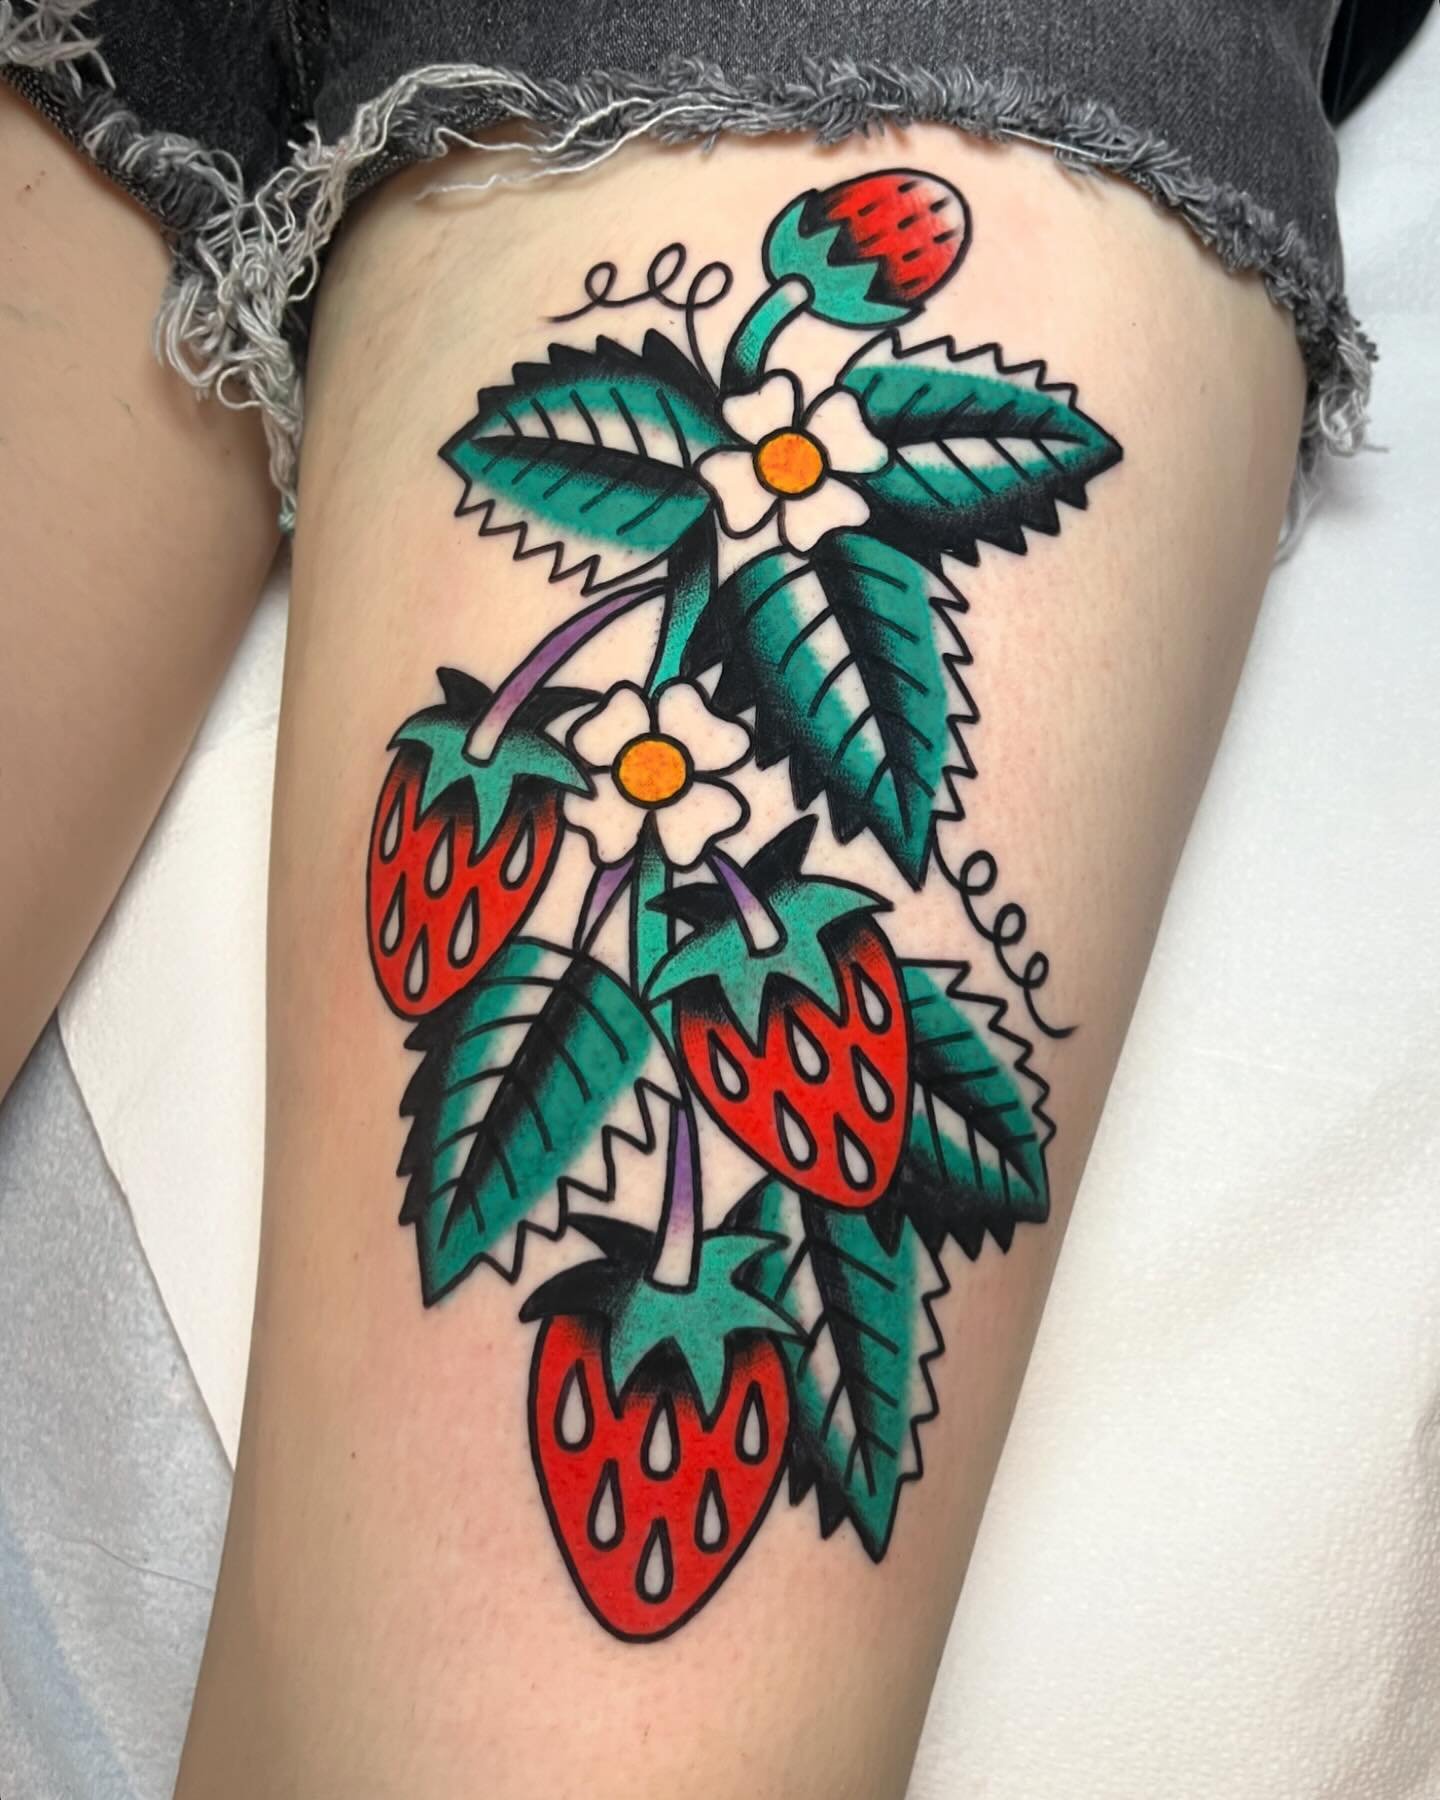 Done by @juliacampione 🌈🌈🌈
Link in her bio for booking 
#chicago #chicagotattooartist #chicagotattooshop #lakeview #logansquare #andersonville #wickerpark #ravenswood #chicagotattoos #chicagotattooartists #tattoo #midwesttattoo #midwesttattooer #l